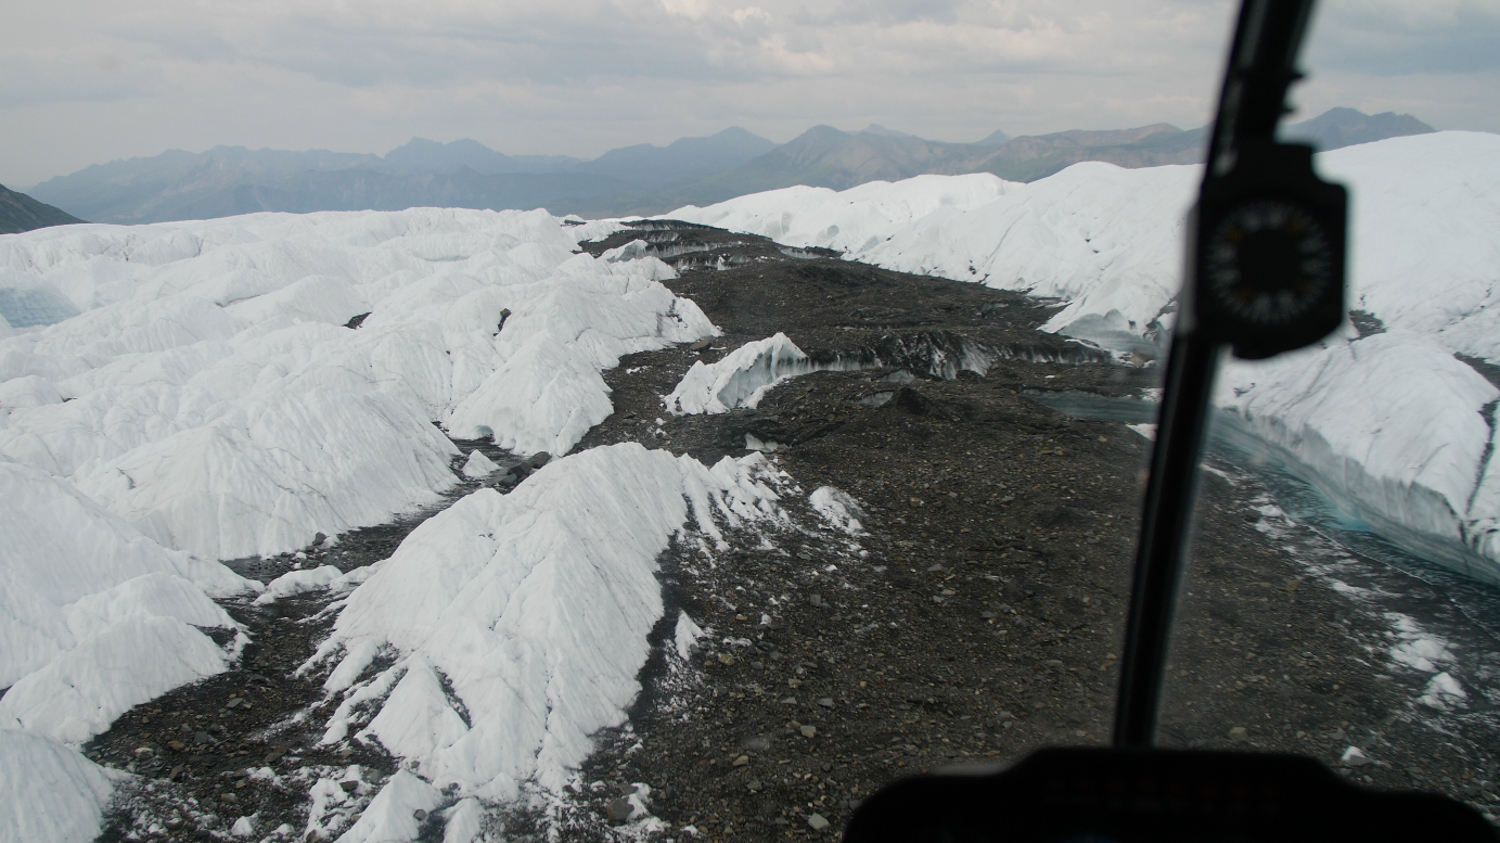 view over Matanuska Glacier from helicopter